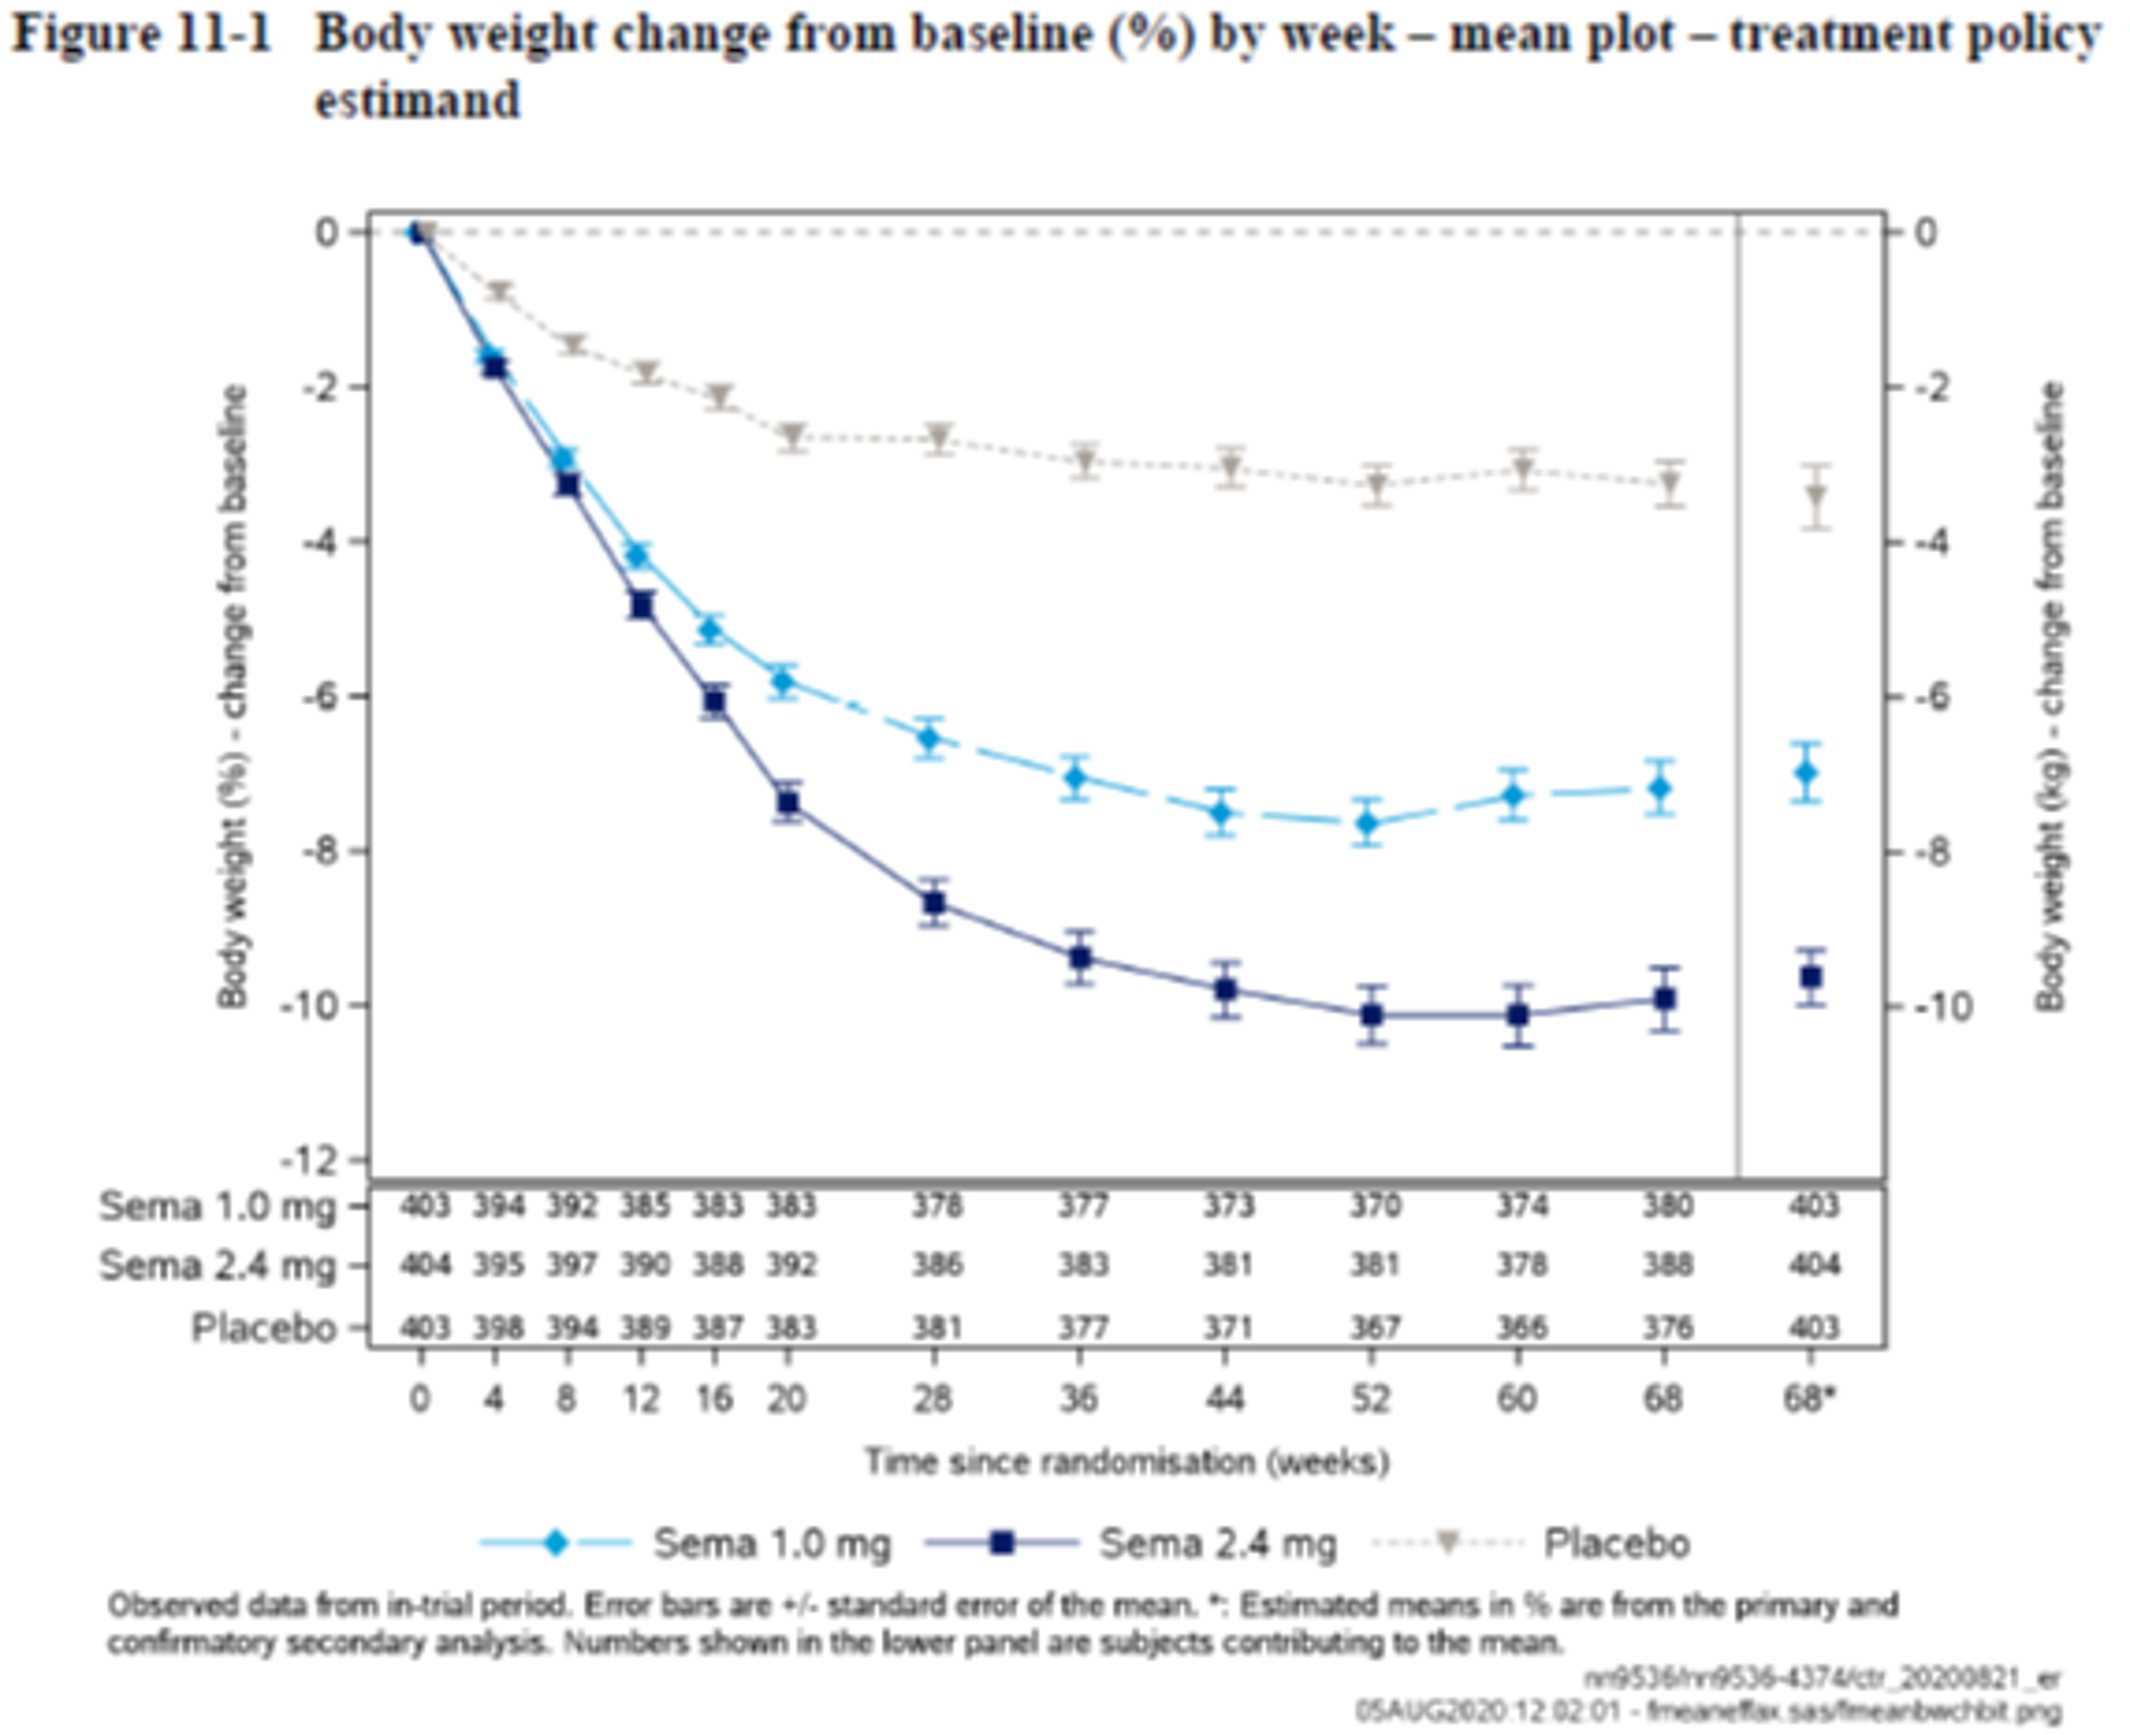 In a graph from 0 to 68 weeks, both semaglutide and placebo decrease over time, with a larger decrease in the semaglutide group, plateauing at around 60 weeks.